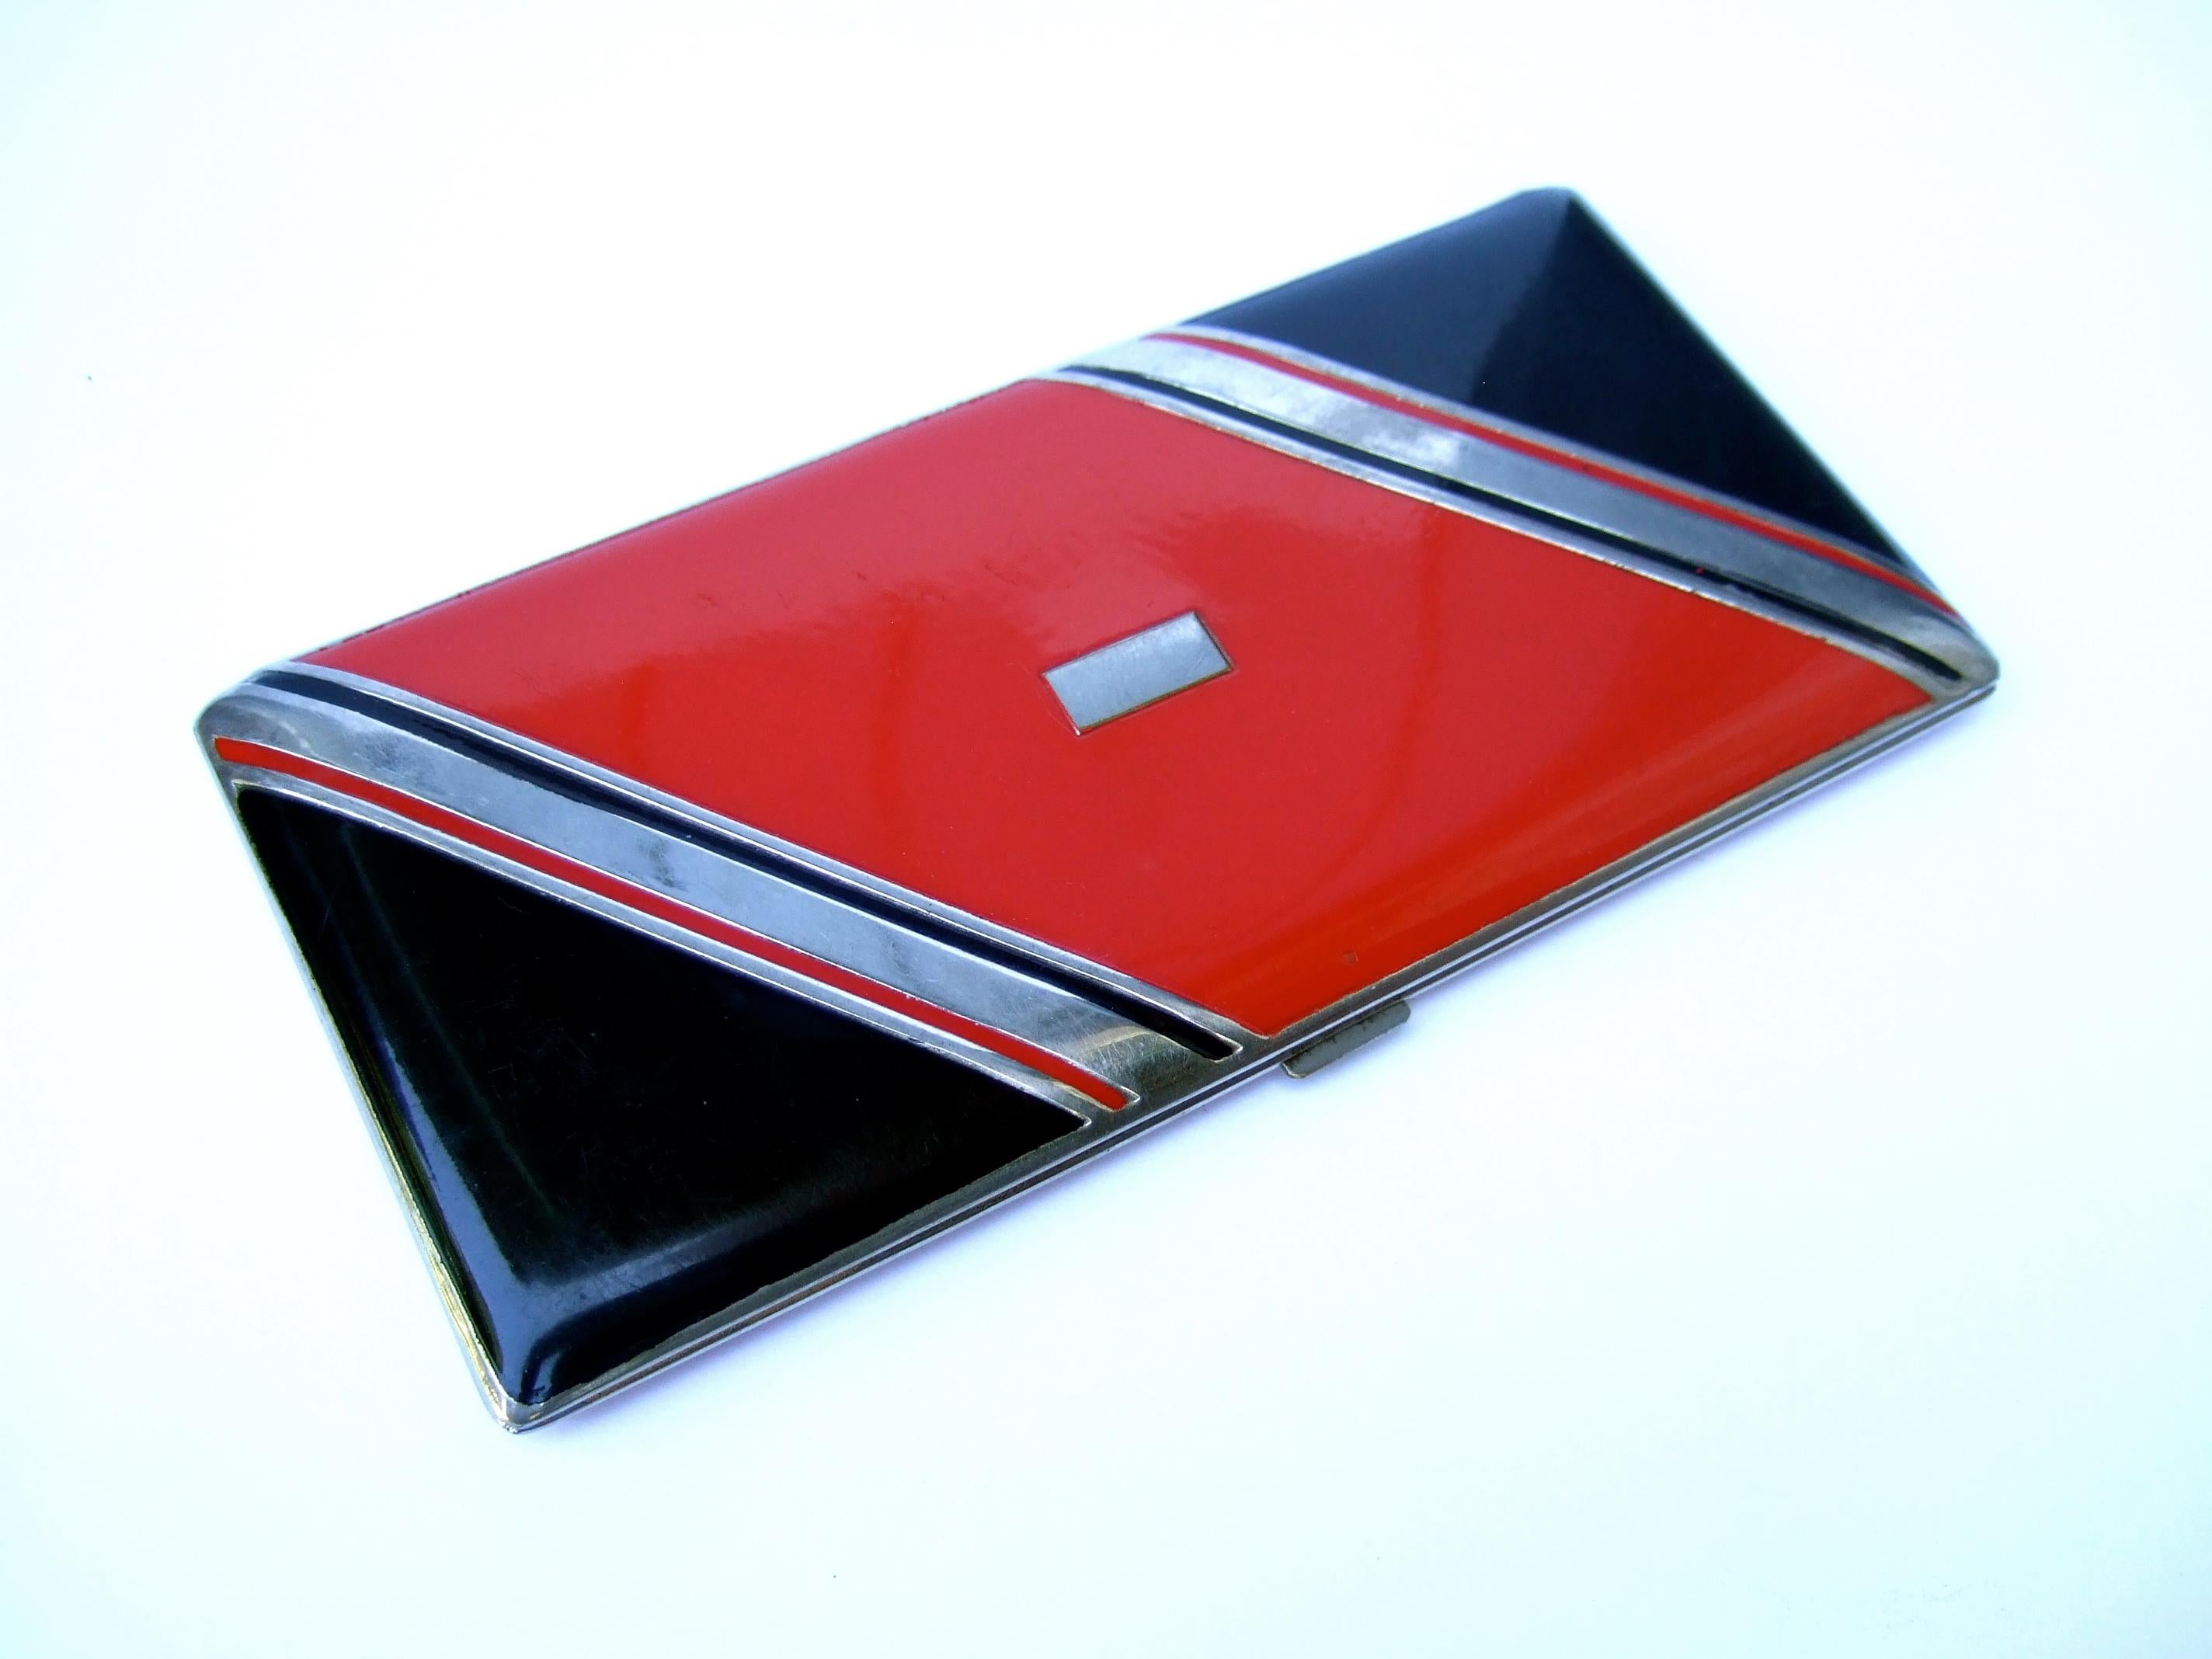 Art Deco sleek red & black enamel unisex cigarette case c 1940s
The elegant cigarette case is designed with a striped enamel
 lid cover with bold red & black geometric lacquered panels 

Accented with chrome metal linear bands across the lid